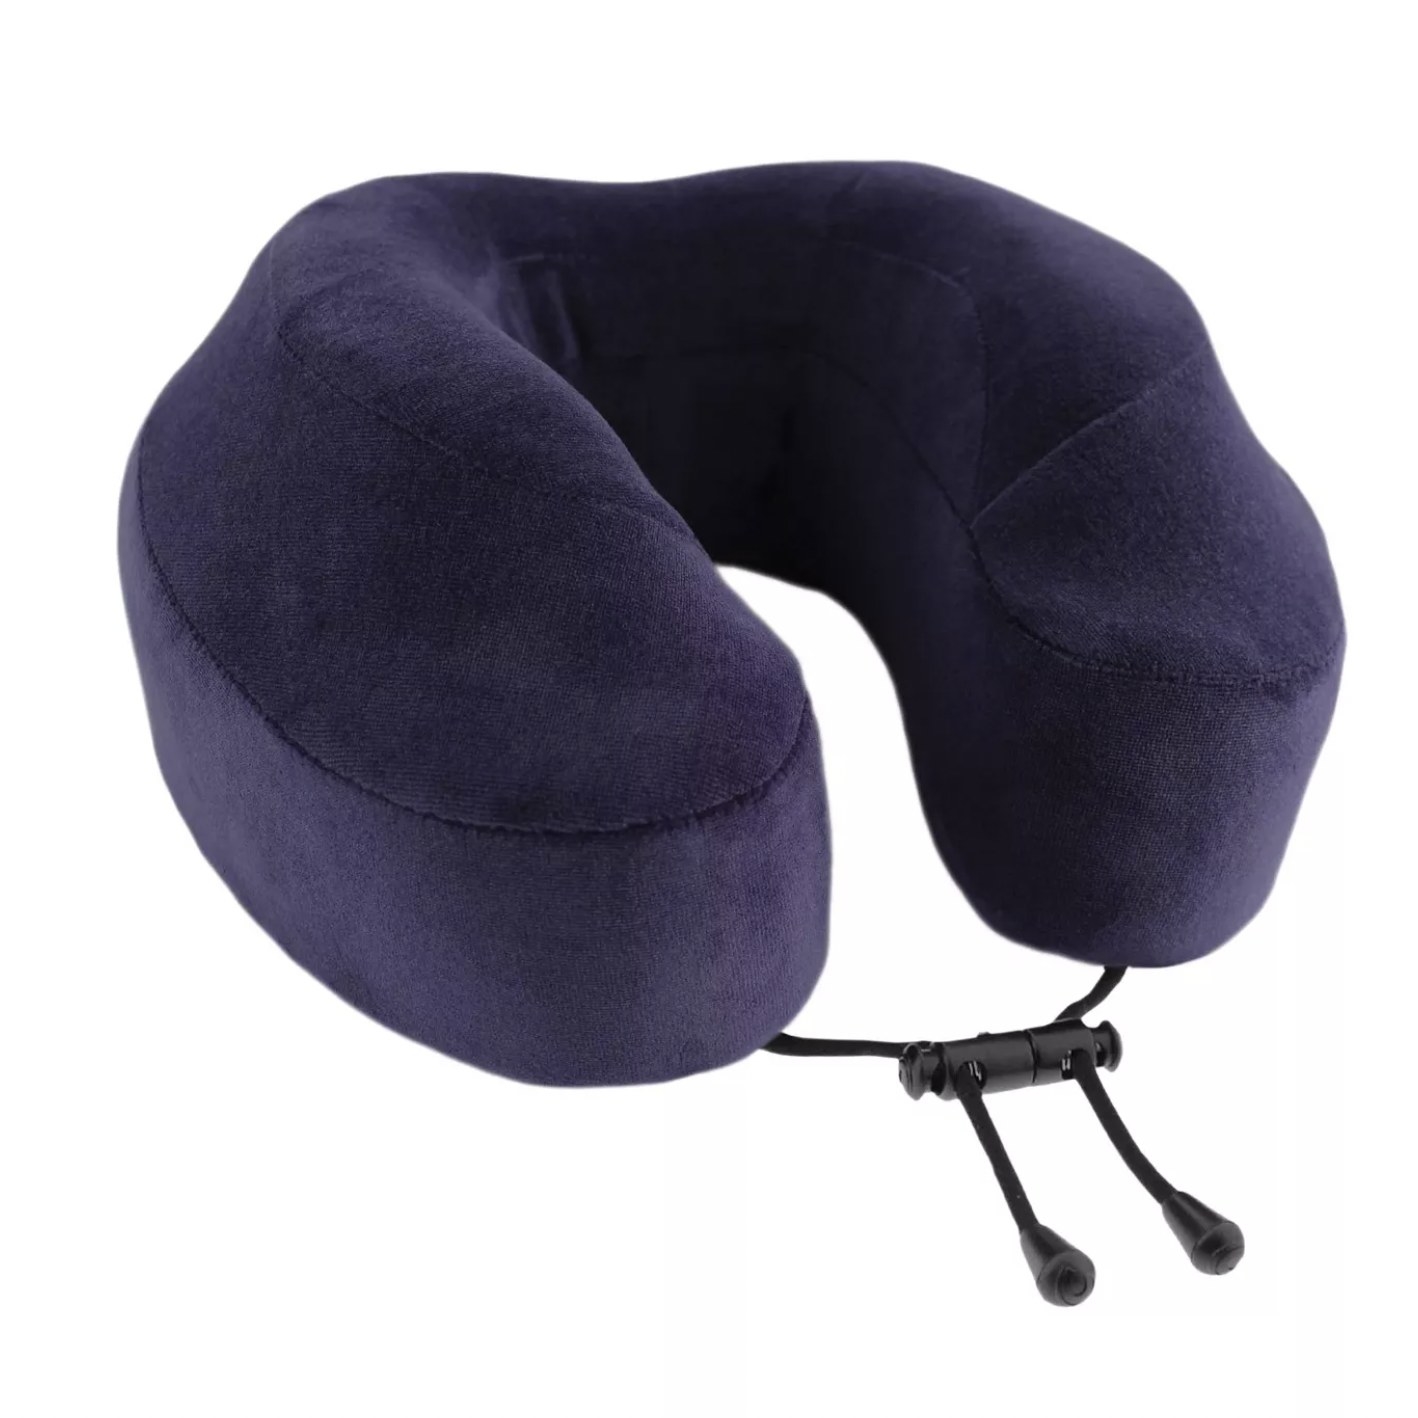 The purple neck pillow with corded tie